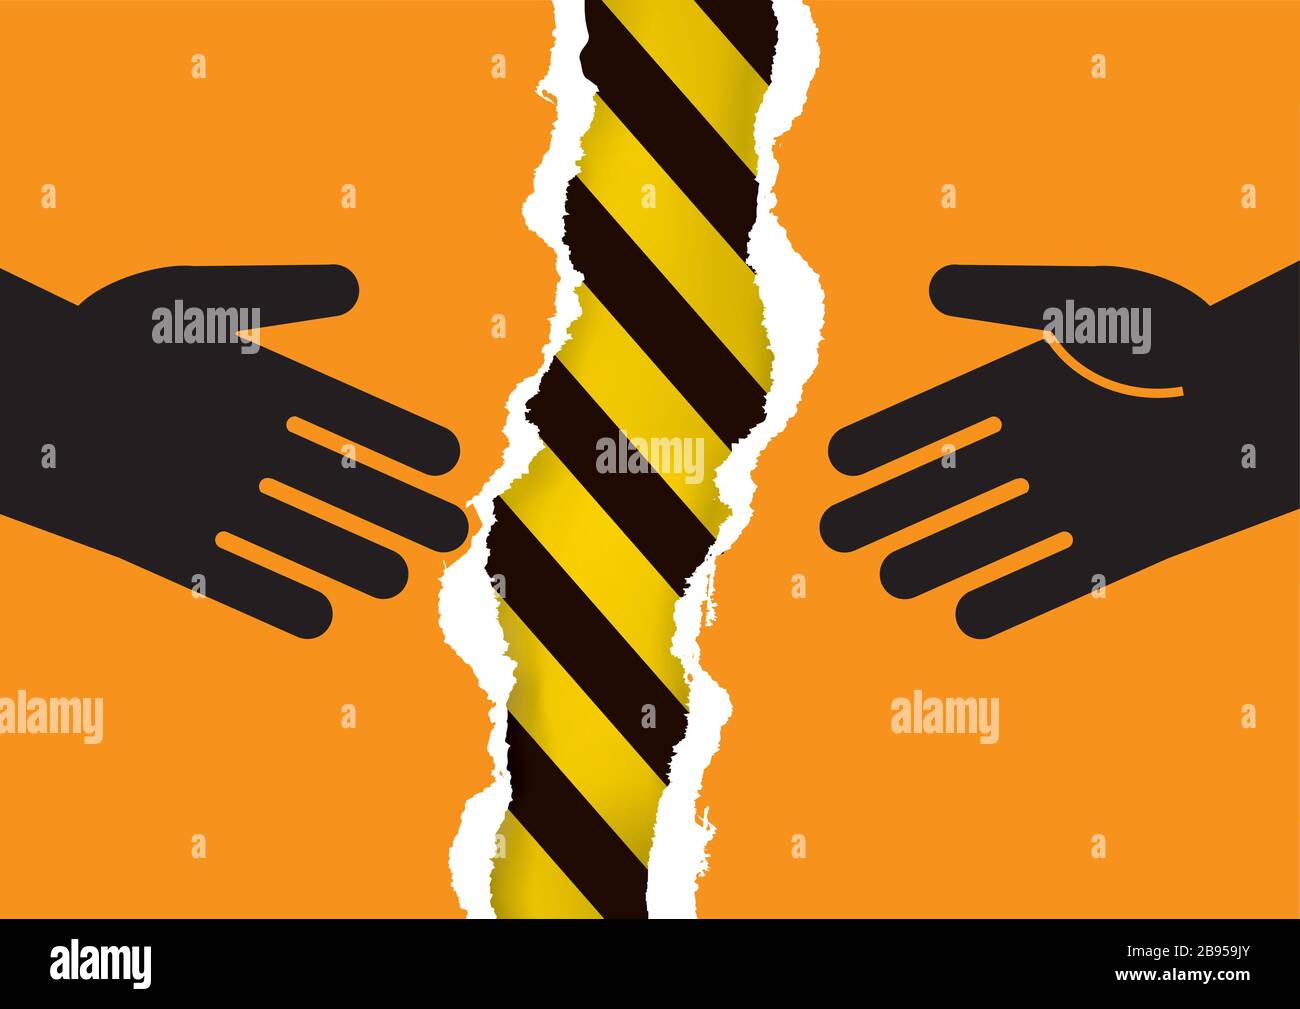 Do not hand shake, danger of virus infection. Illustration of torn paper with hand icons and under construction sign. Vector available. Stock Vector